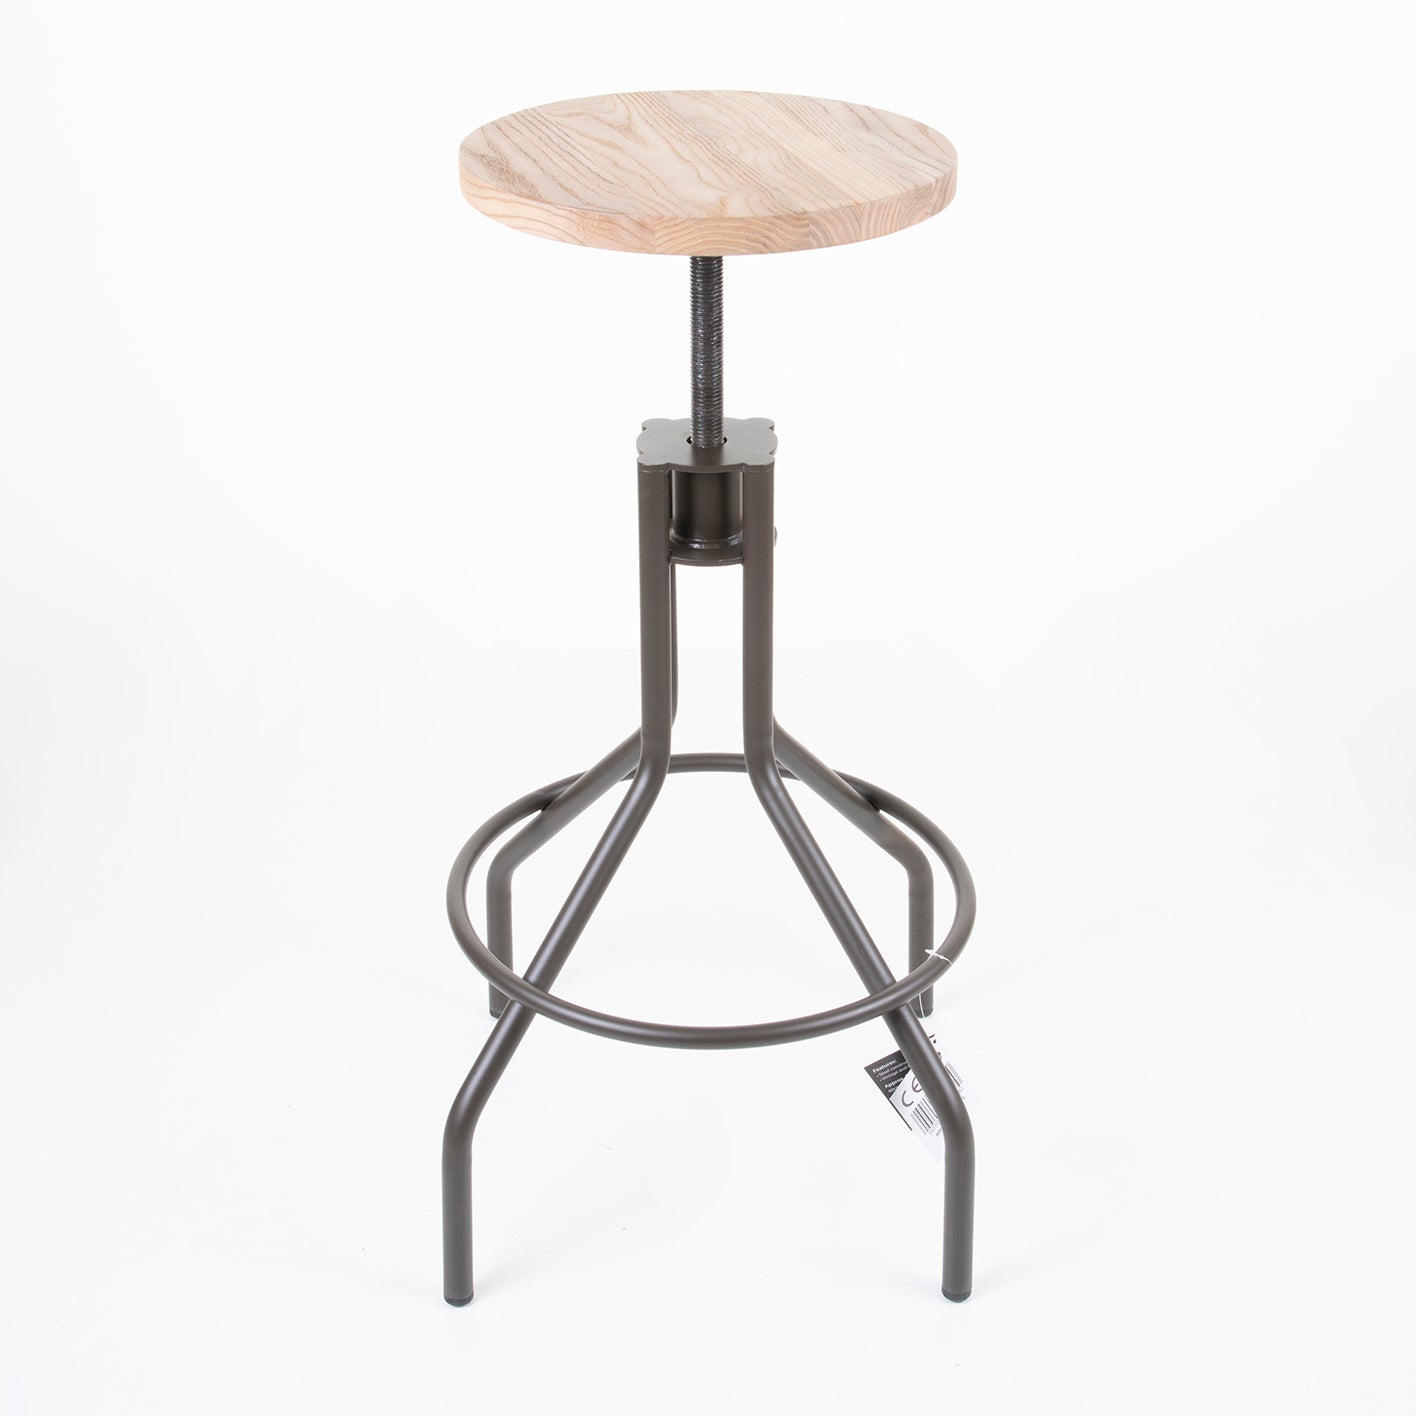 Set of 2 Rustic Wooden Bar Stool - Round Frame